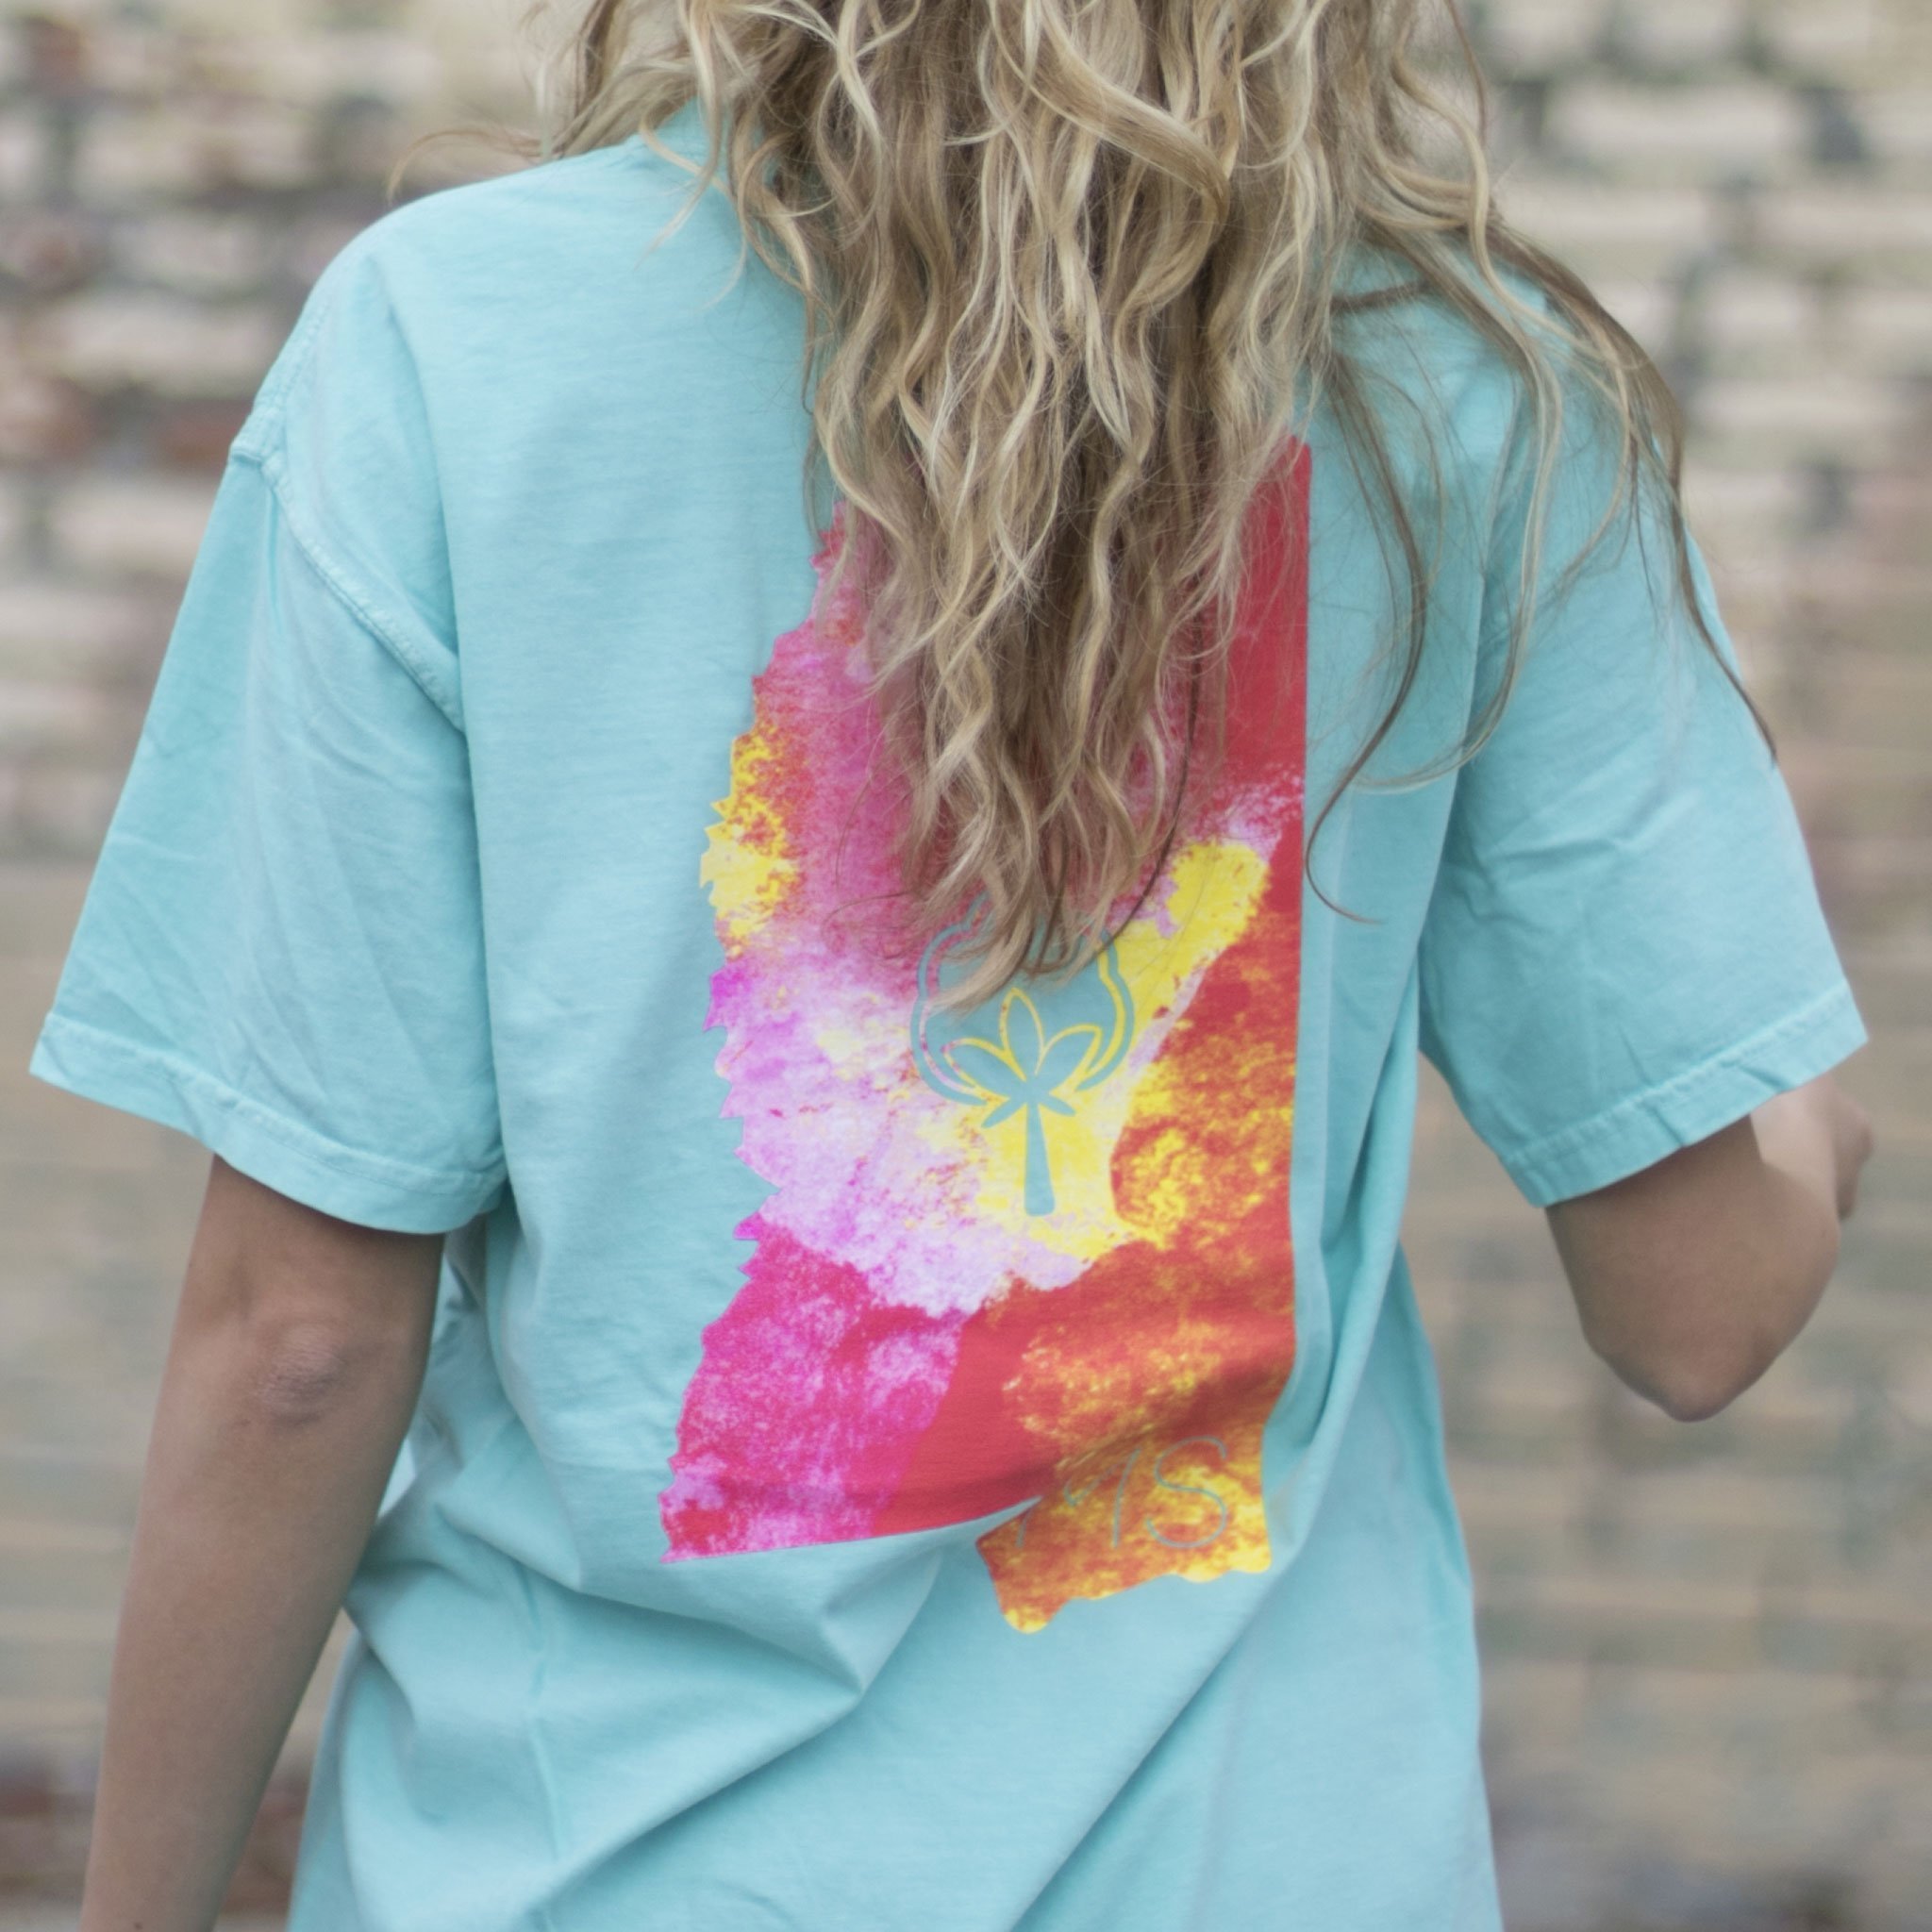 old-state-pride-s-chalky-mint-mississippi-watercolor-short-sleeve-shirts-1374666620956_2048x@2x.jpg